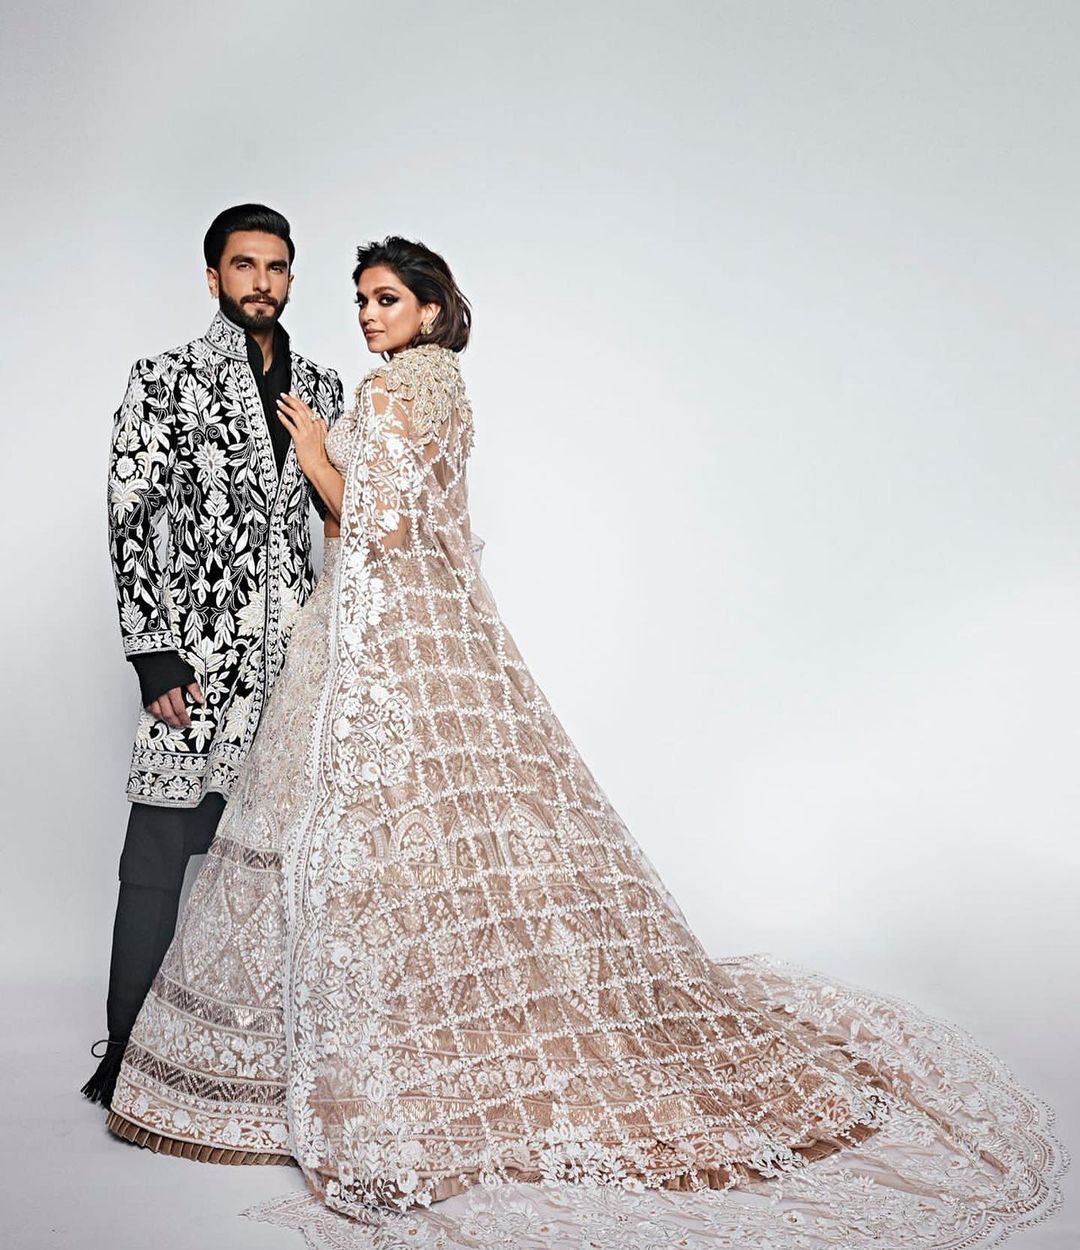 DEEPIKA PADUKONE: Deepika Padukone looked regal in this ethereal and elegant soft taupe lehenga choli with intricate designs and chikankari craft and paired it with a theatrical cape. She opted for bold eyes and glam makeup. For your festive look, you can chuck the cape and opt for a sheer chikankari dupatta. (Image: Instagram)